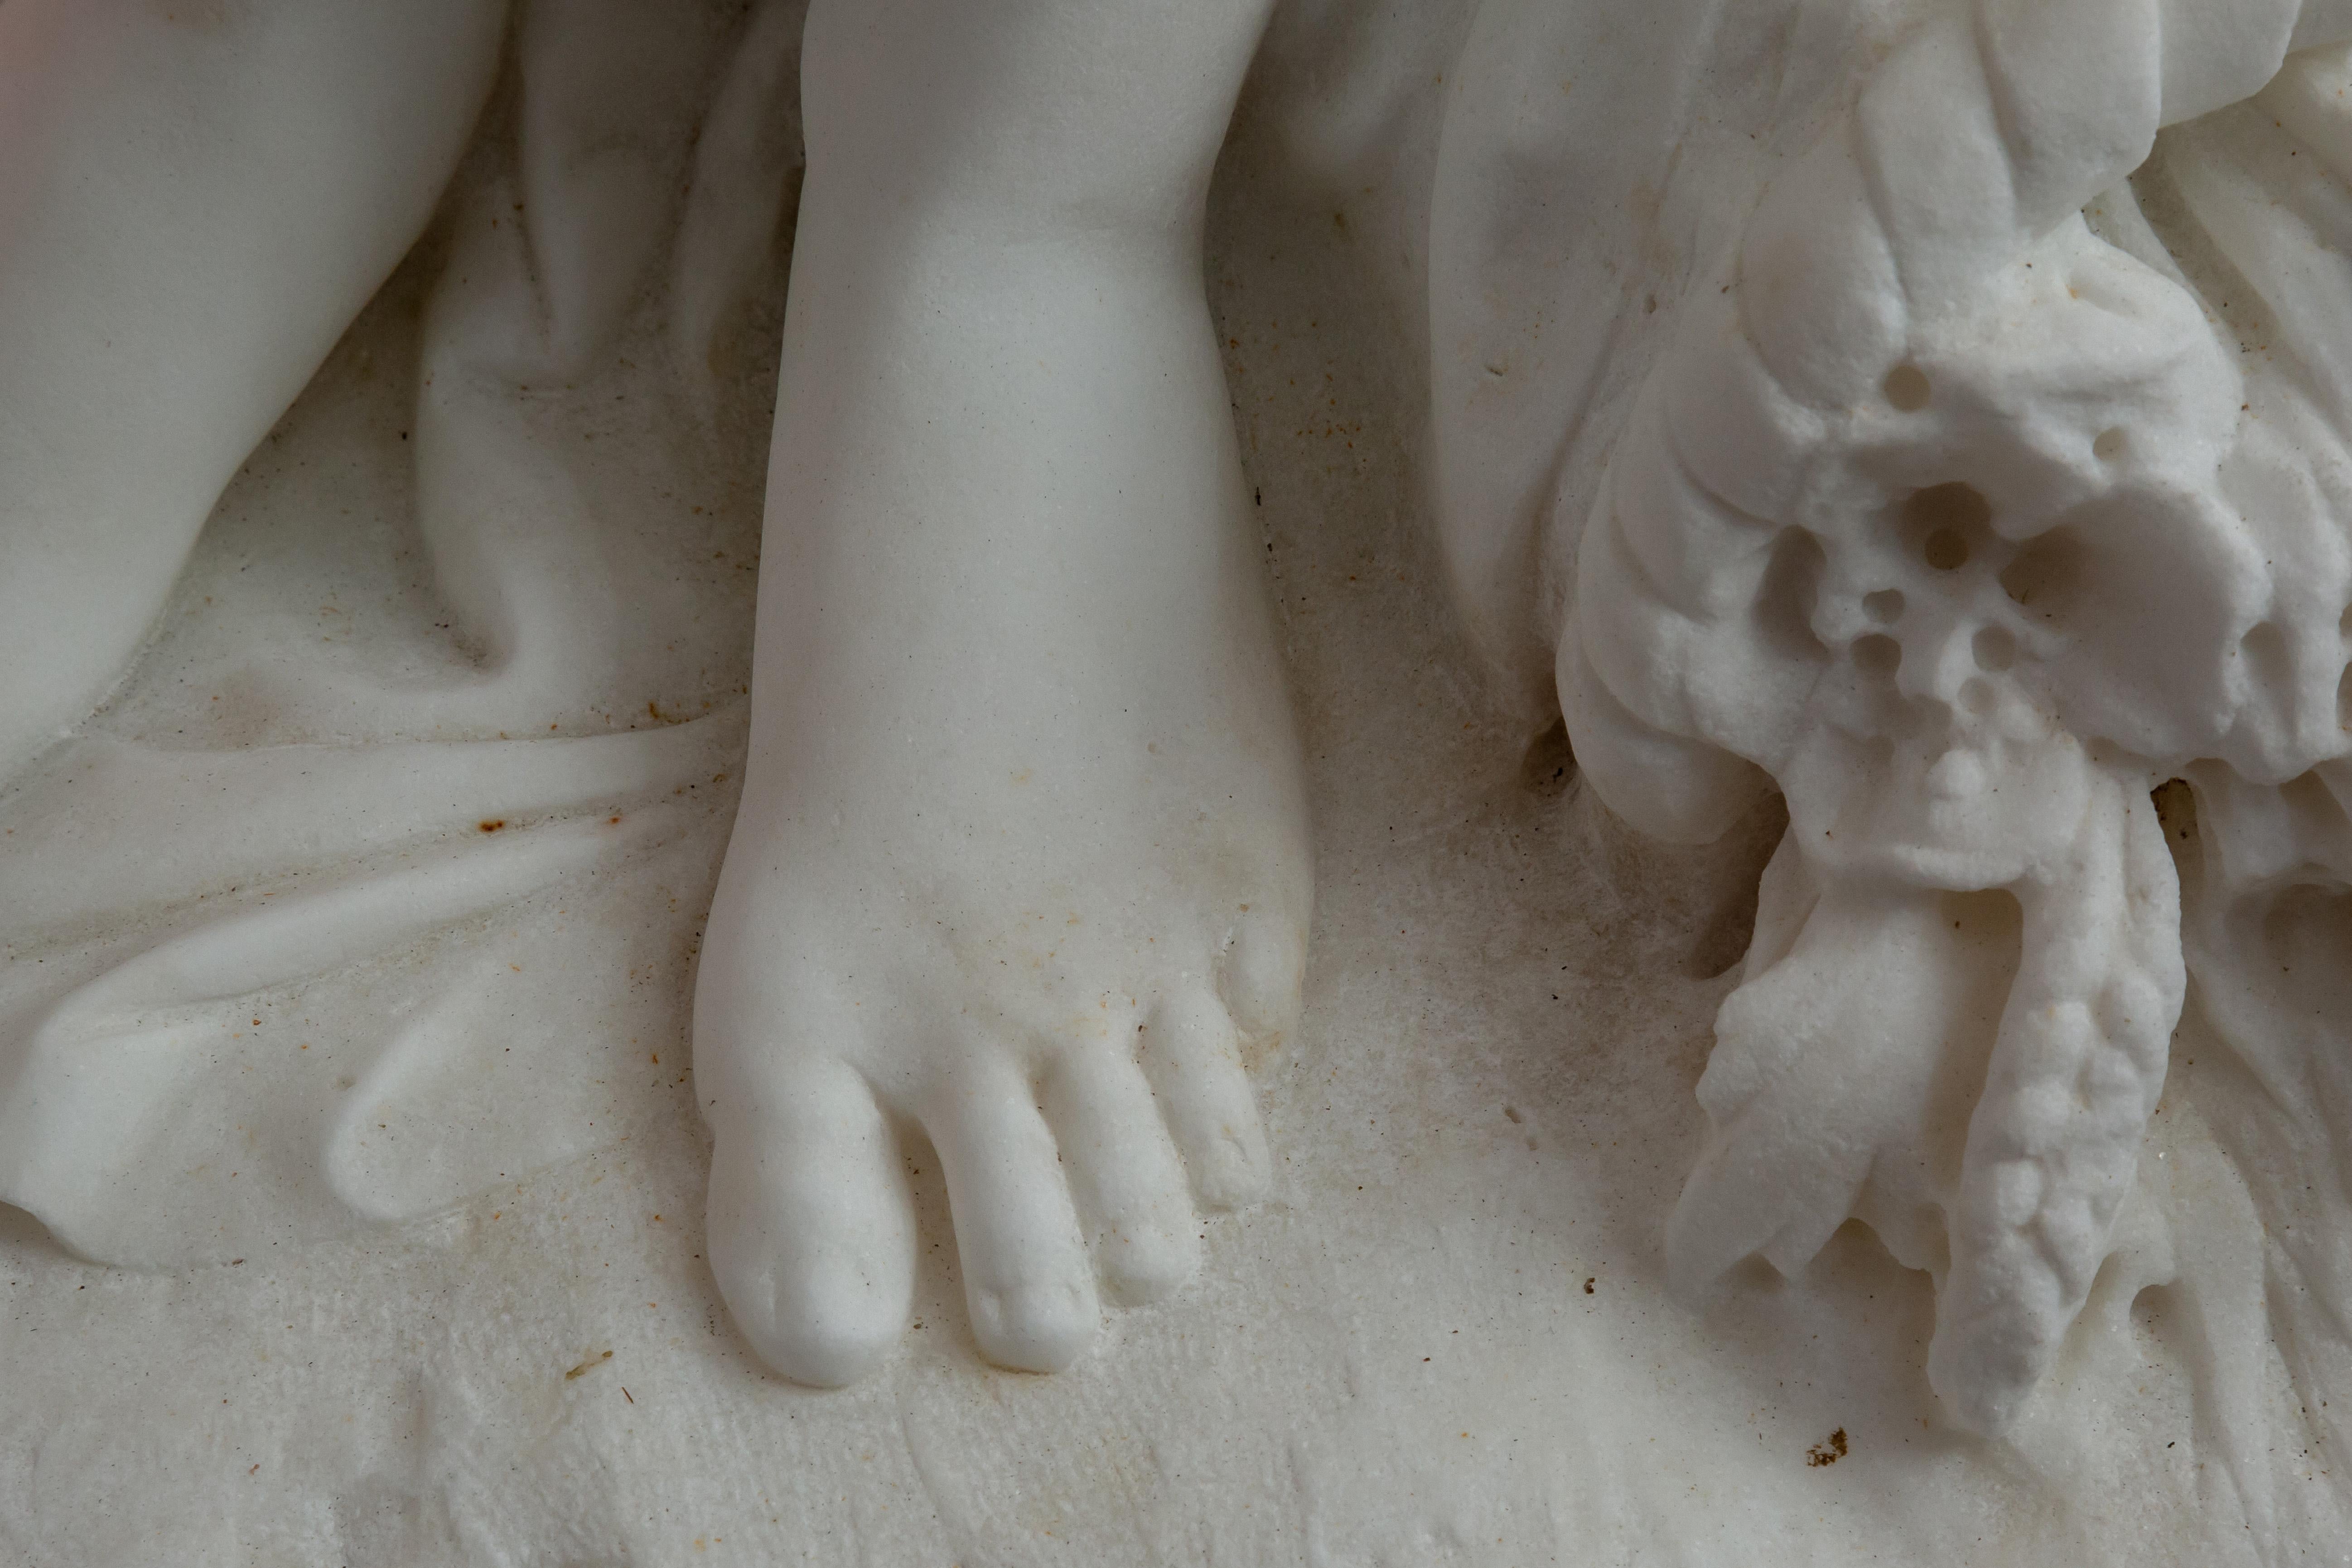 Le Retour des Champs ‘Return from the Harvest’ Carrara Marble, Signed and Dated 6